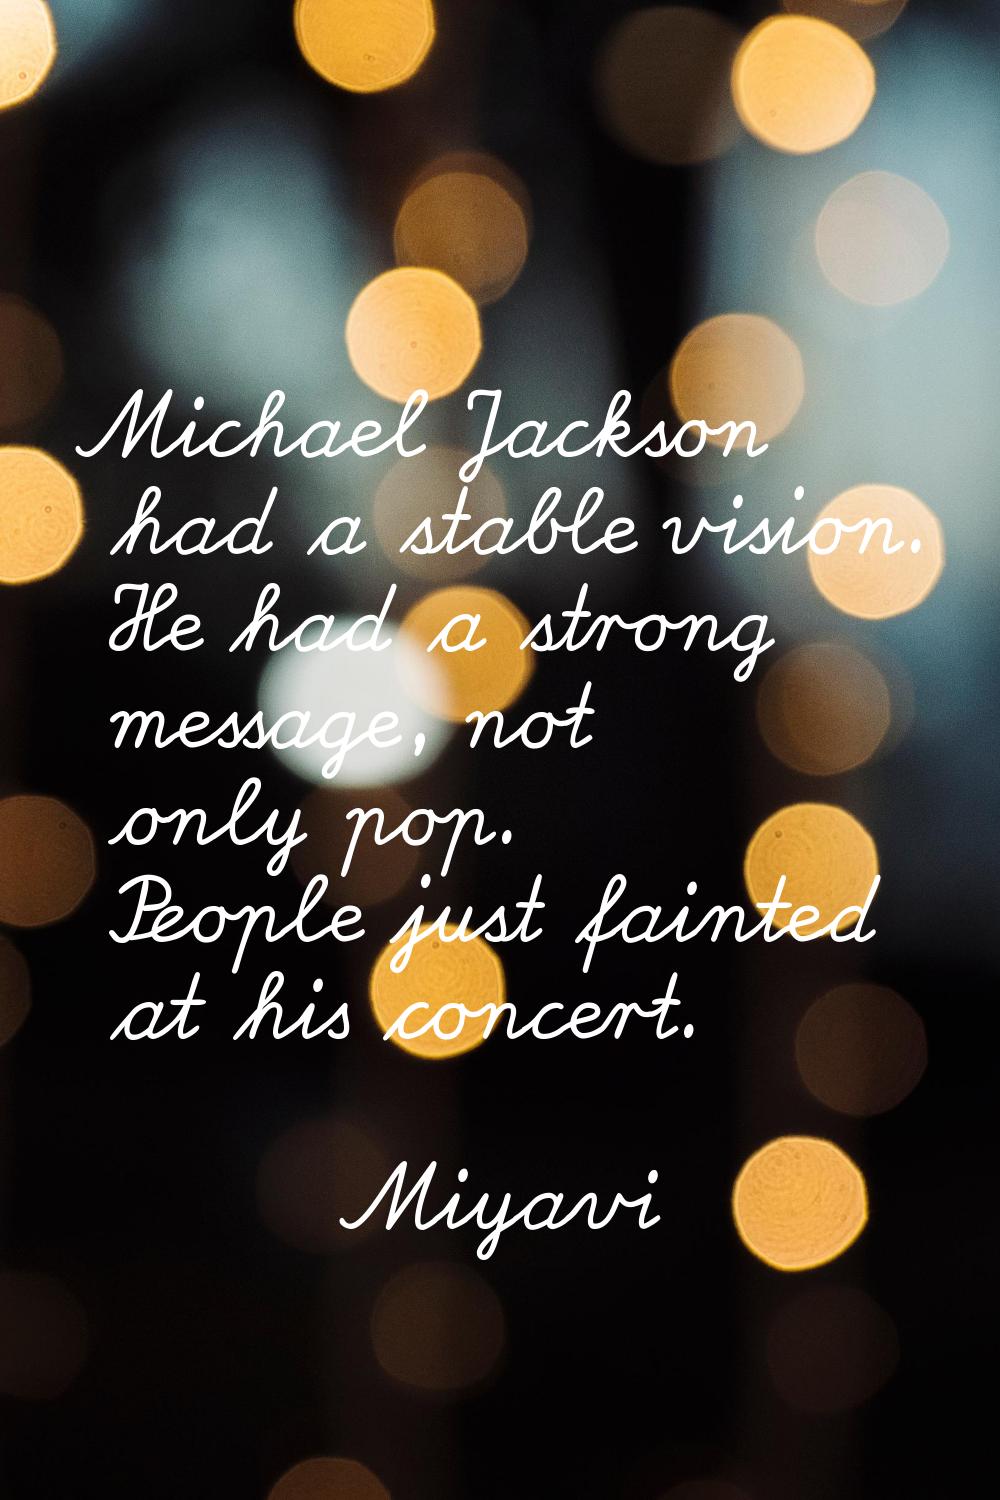 Michael Jackson had a stable vision. He had a strong message, not only pop. People just fainted at 